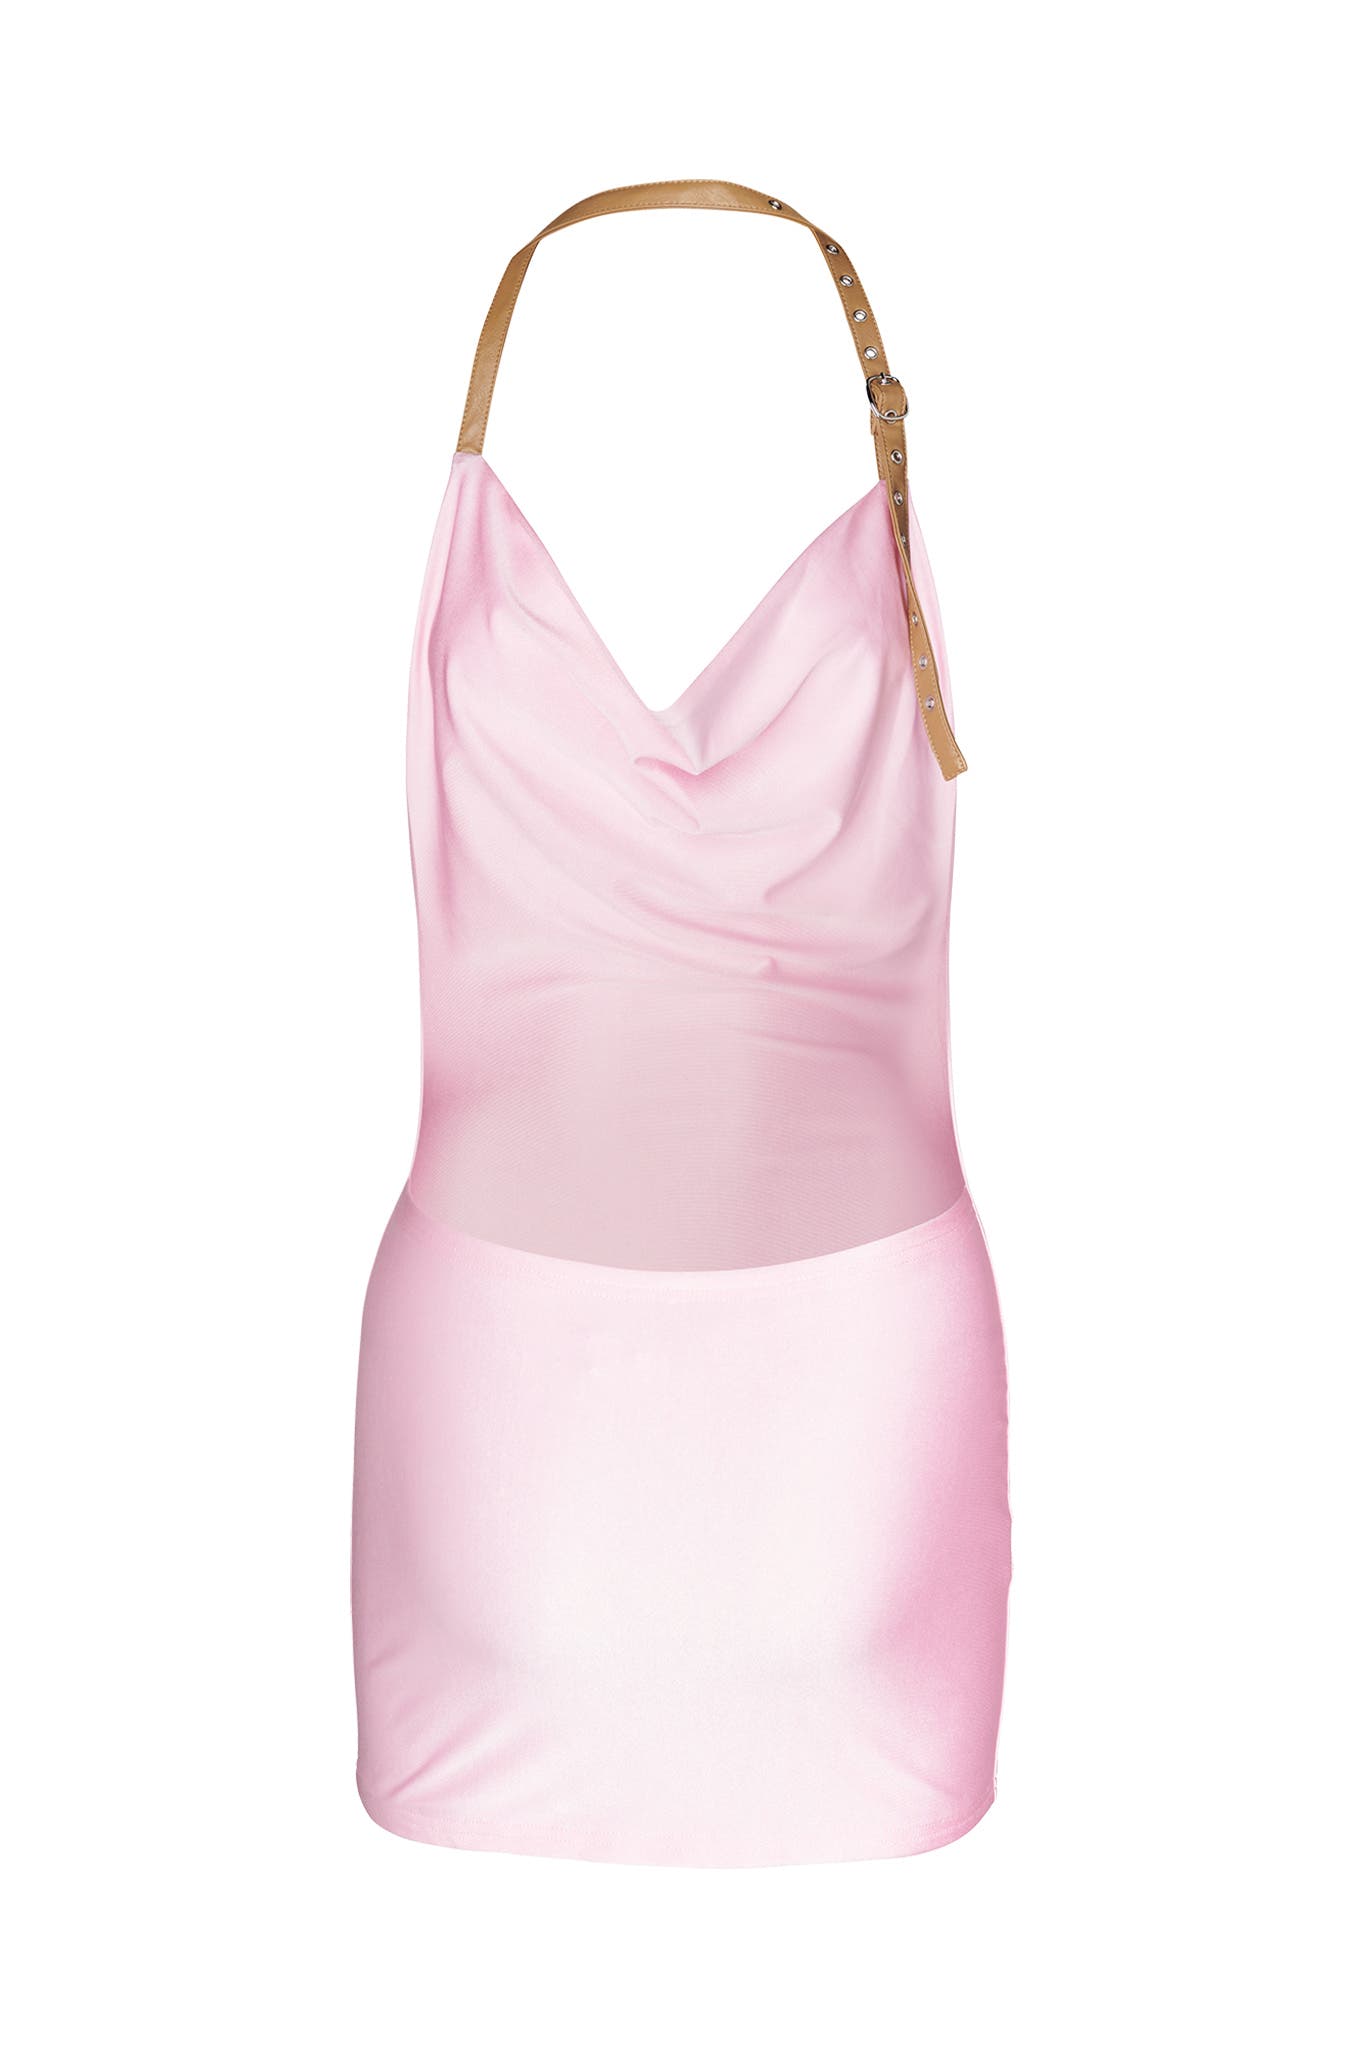 MAIRE DRESS - PINK : BABY PINK